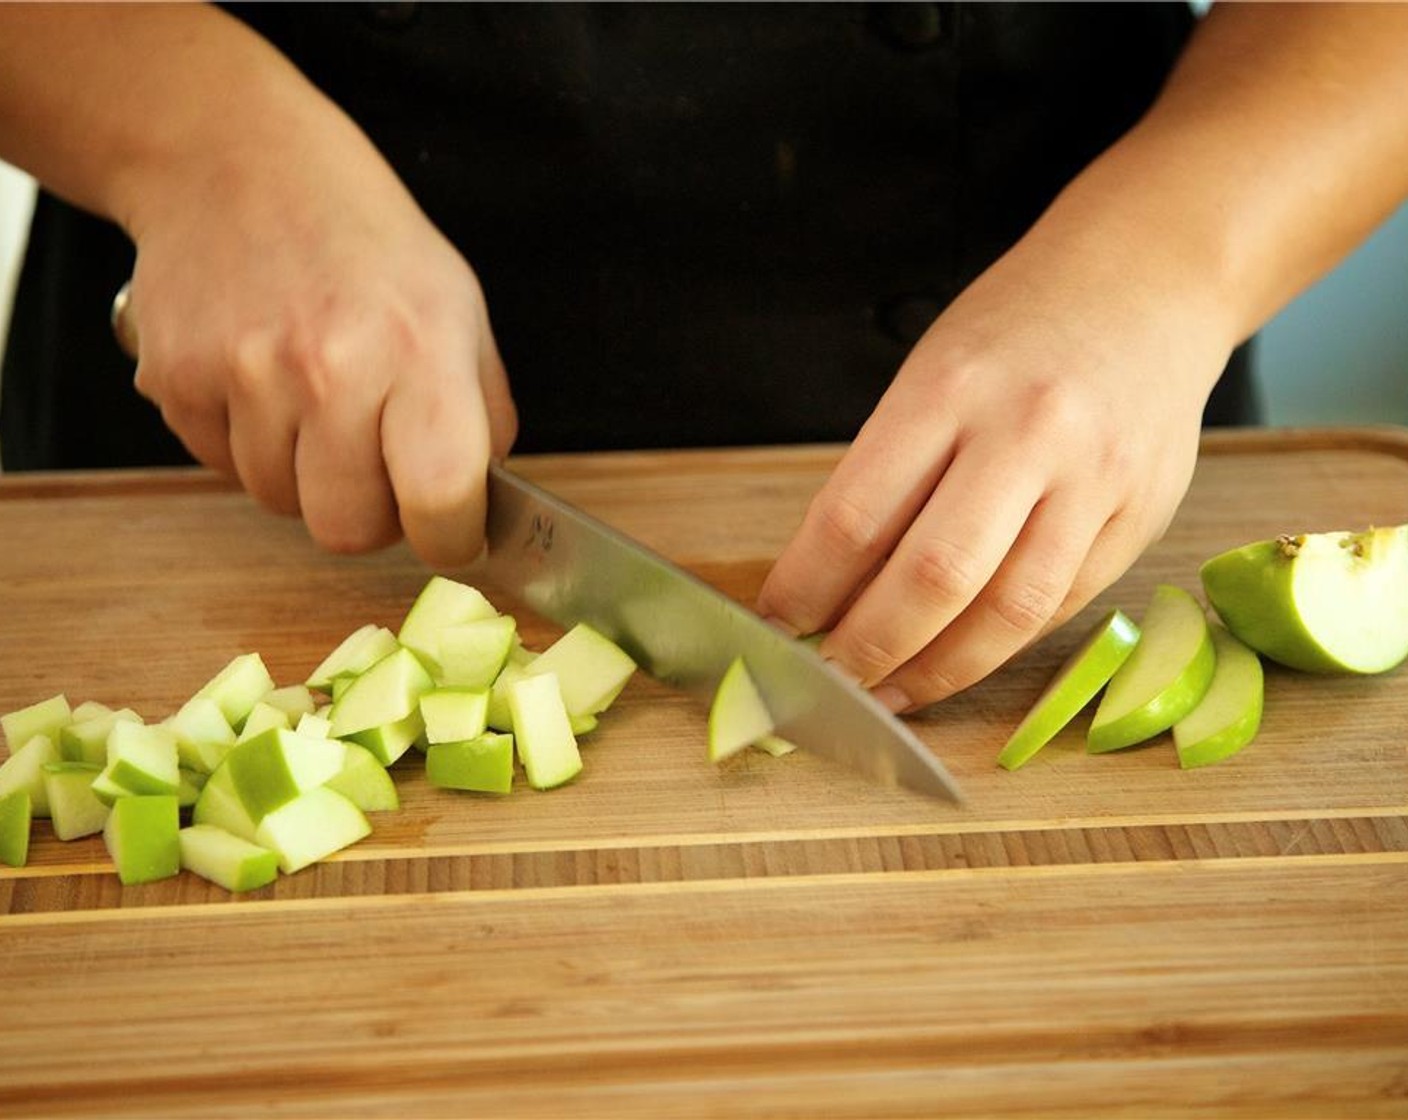 step 6 Slice Granny Smith Apple (1) into quarters, lay flat side on cutting board, and remove the core on each slice with your knife, cutting on a bias. Discard core. Dice apple into quarter inch small pieces.